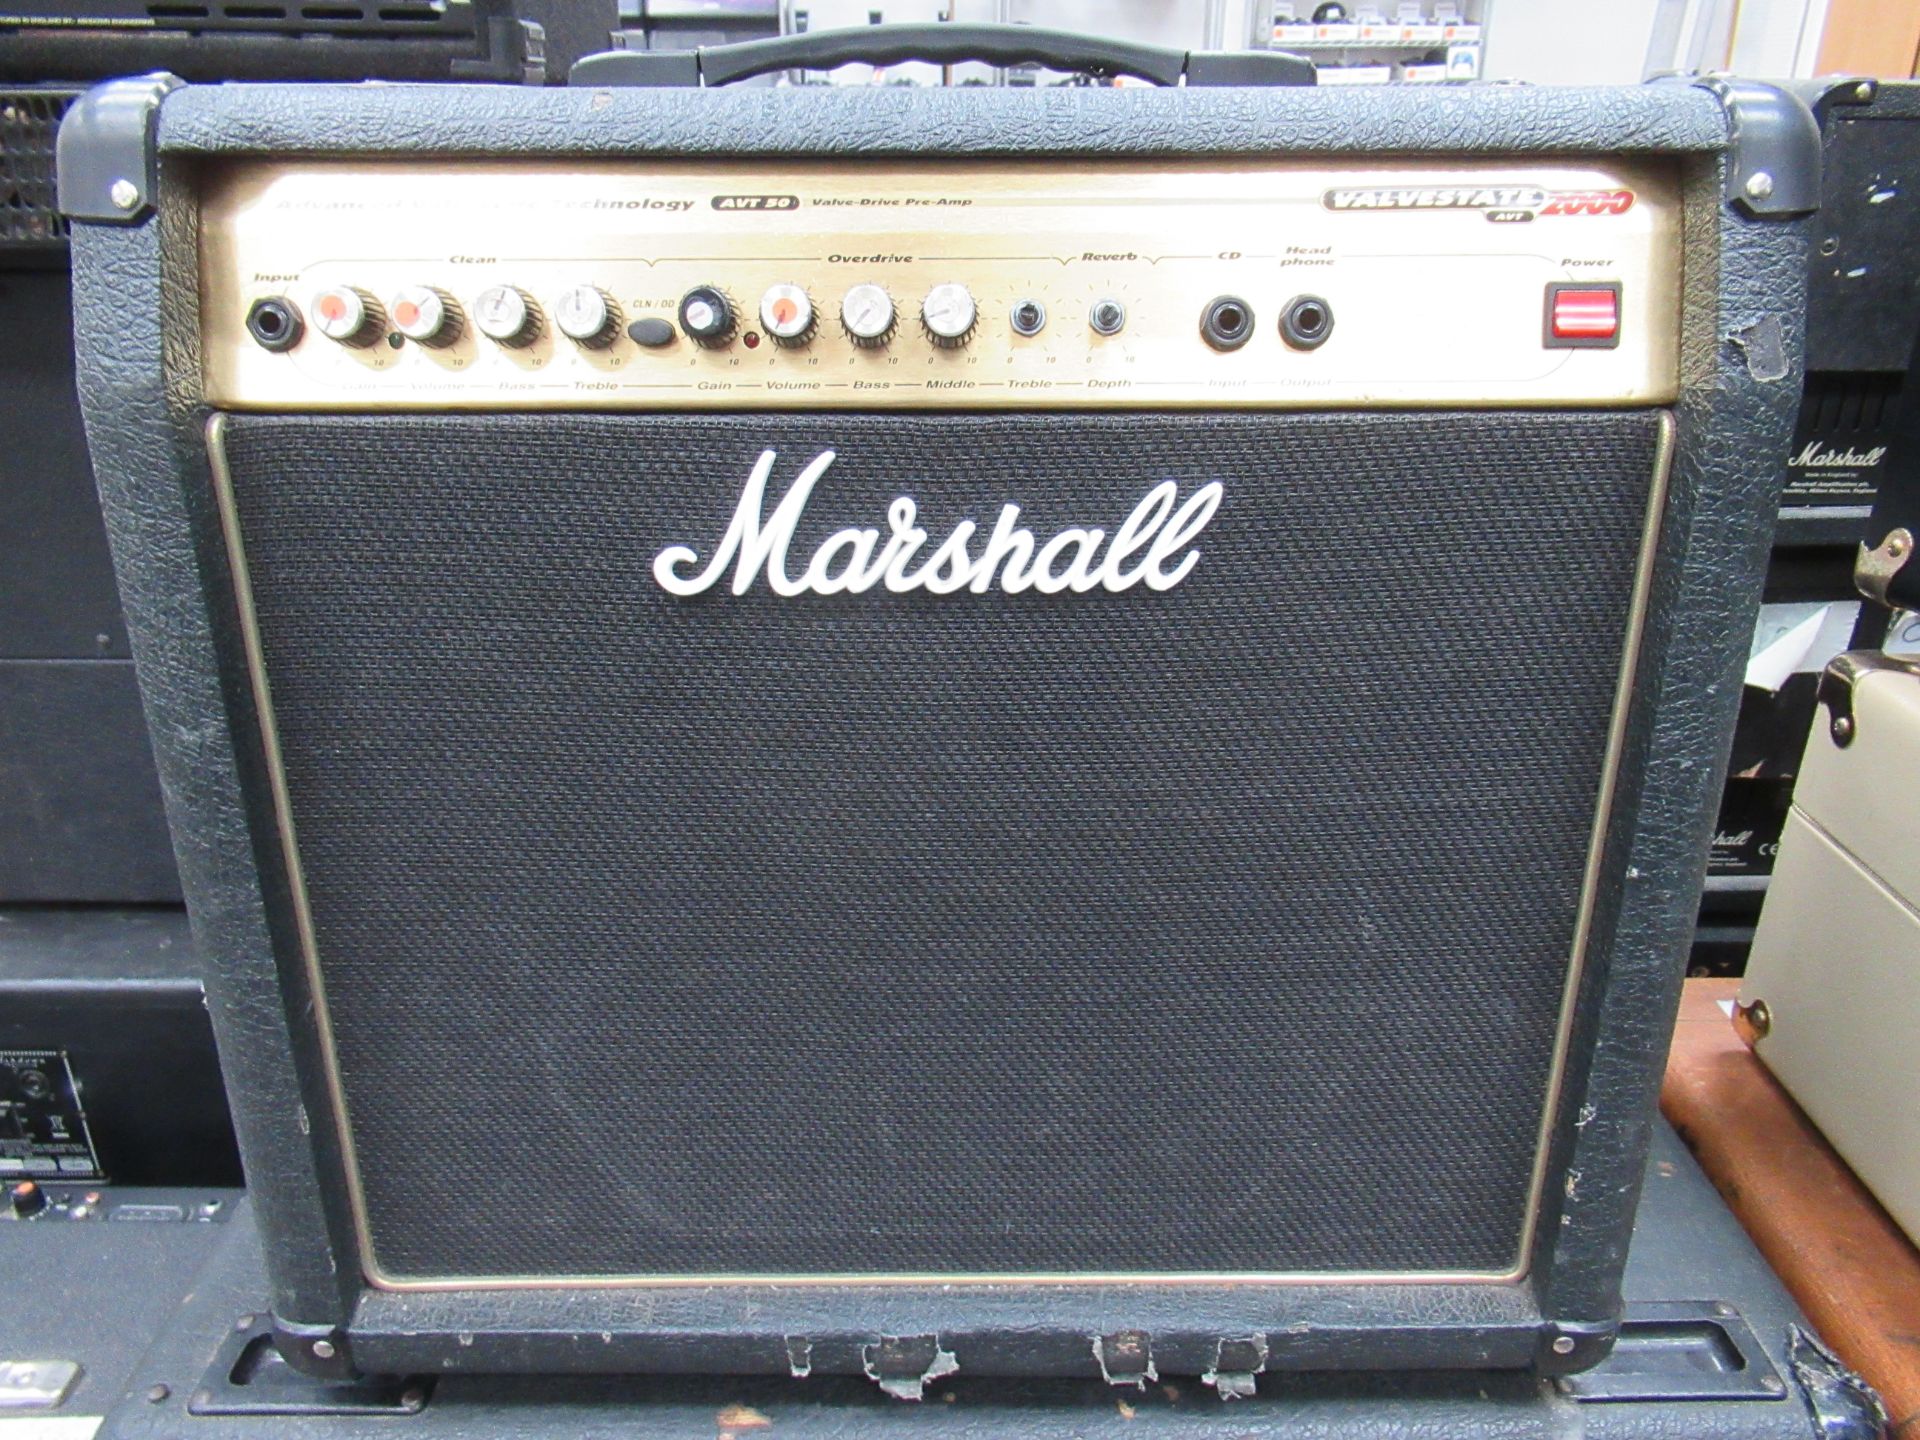 2x Pre-Amps- 1x Marshall; 1x Ampey- and a Marshall Speaker - Image 4 of 8